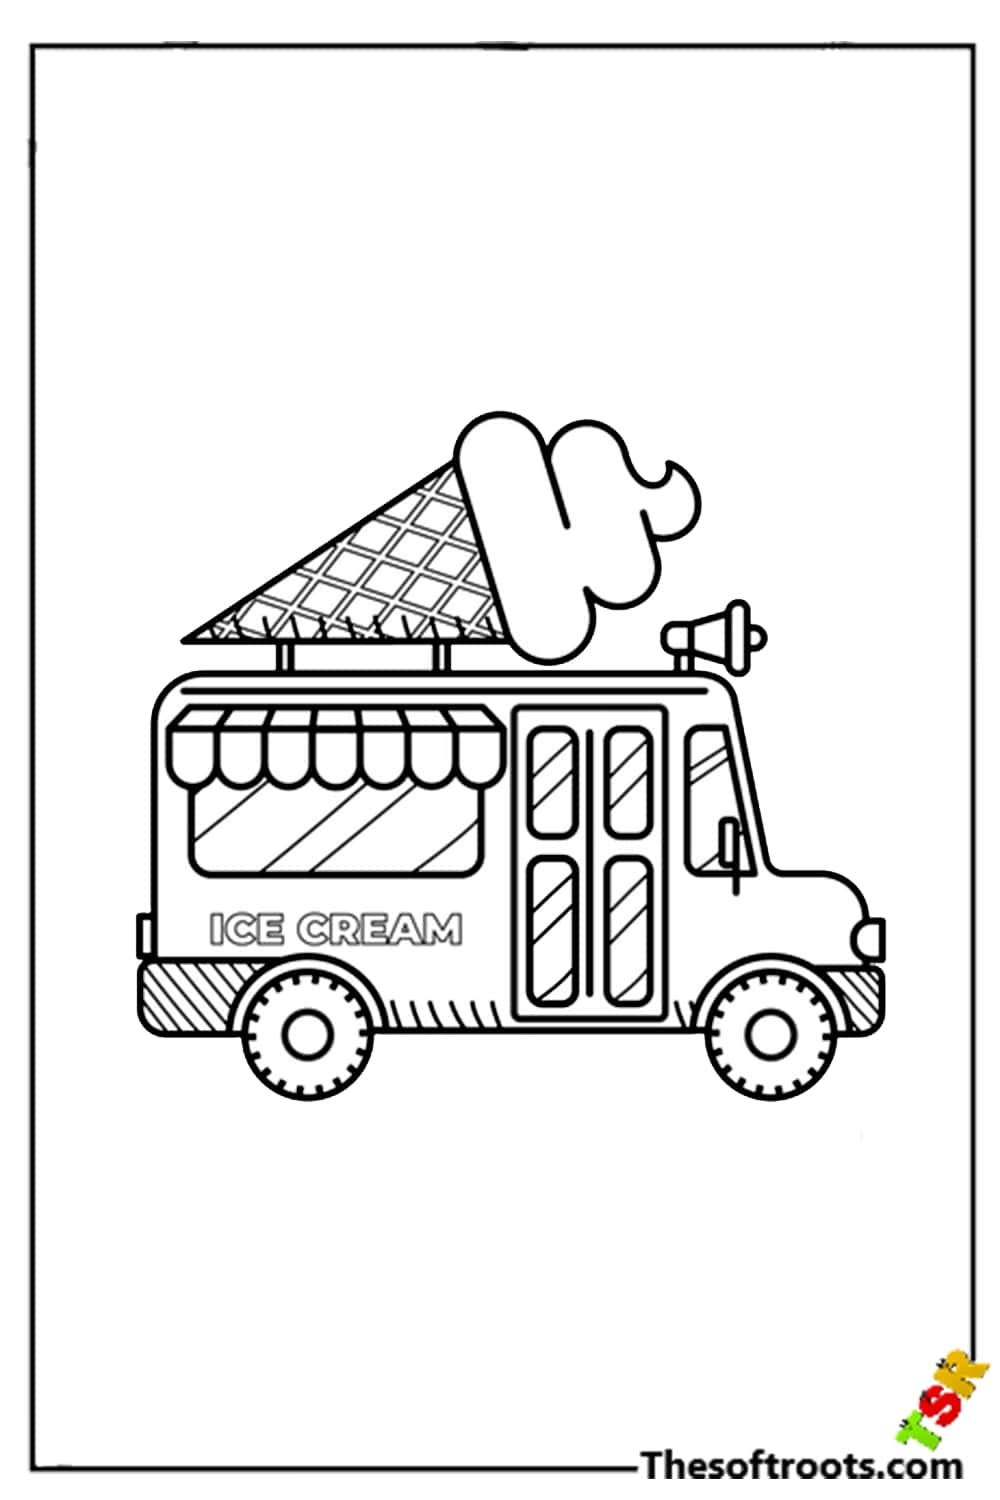 Ice cream van coloring pages